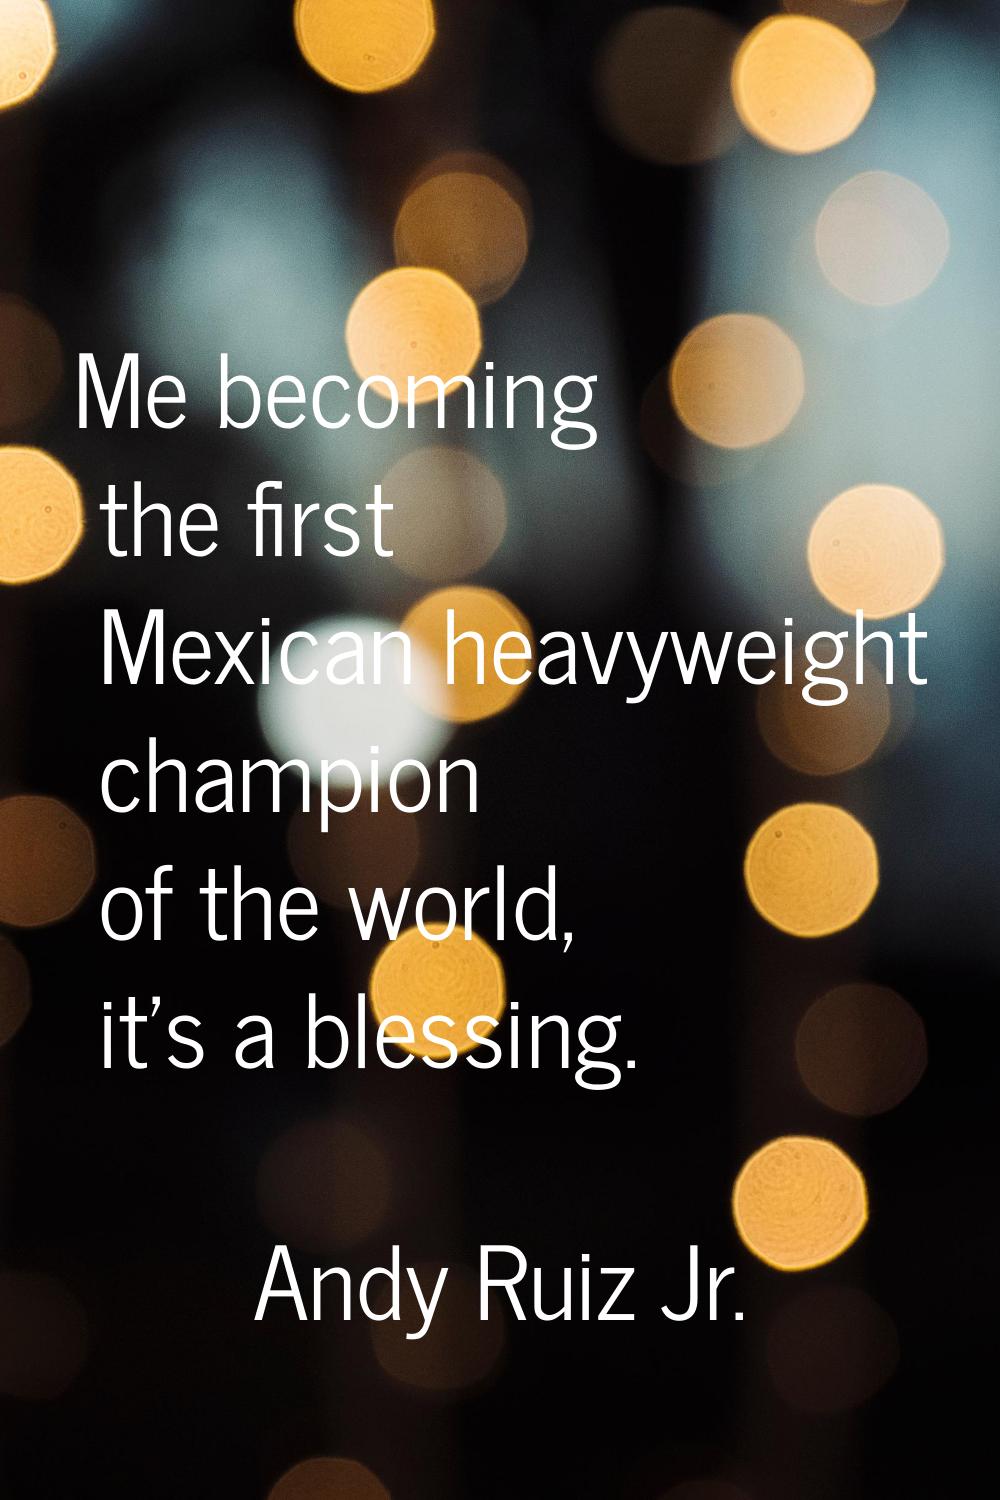 Me becoming the first Mexican heavyweight champion of the world, it's a blessing.